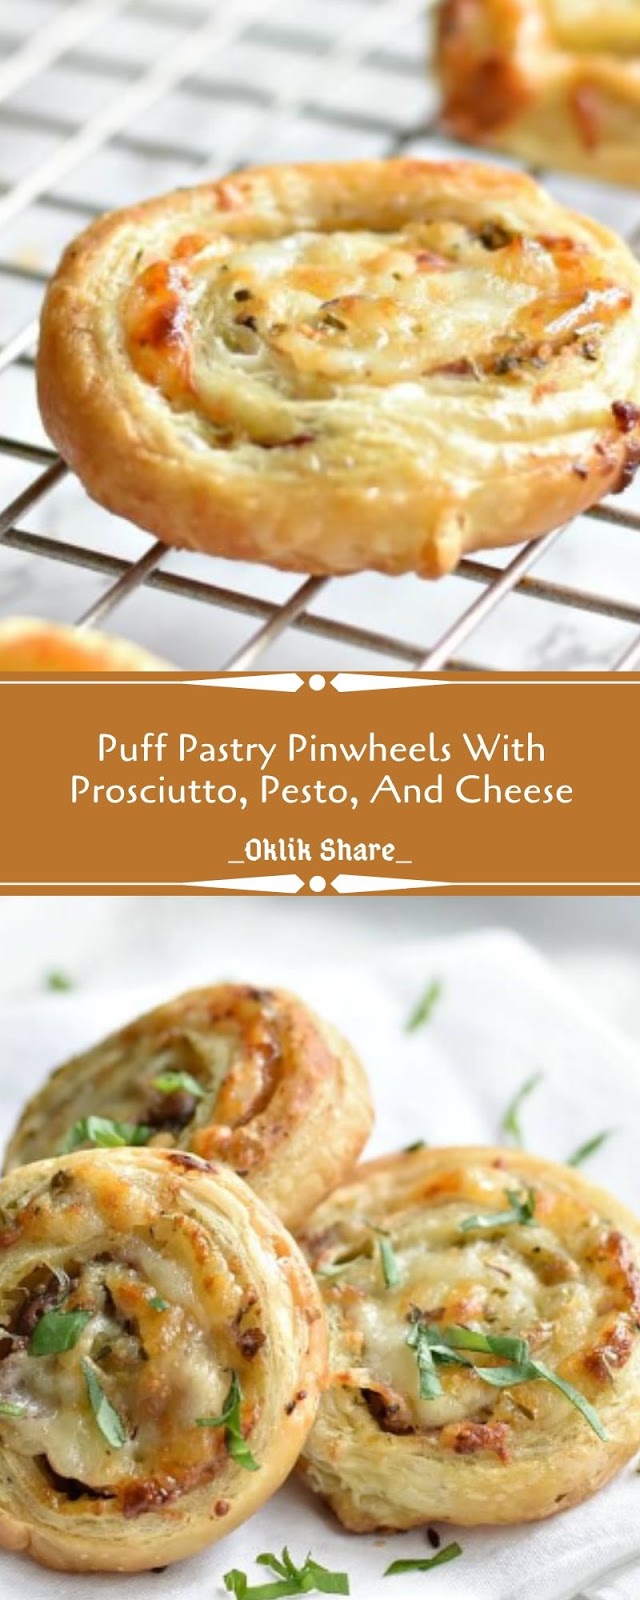 Puff Pastry Pinwheels With Prosciutto, Pesto, And Cheese